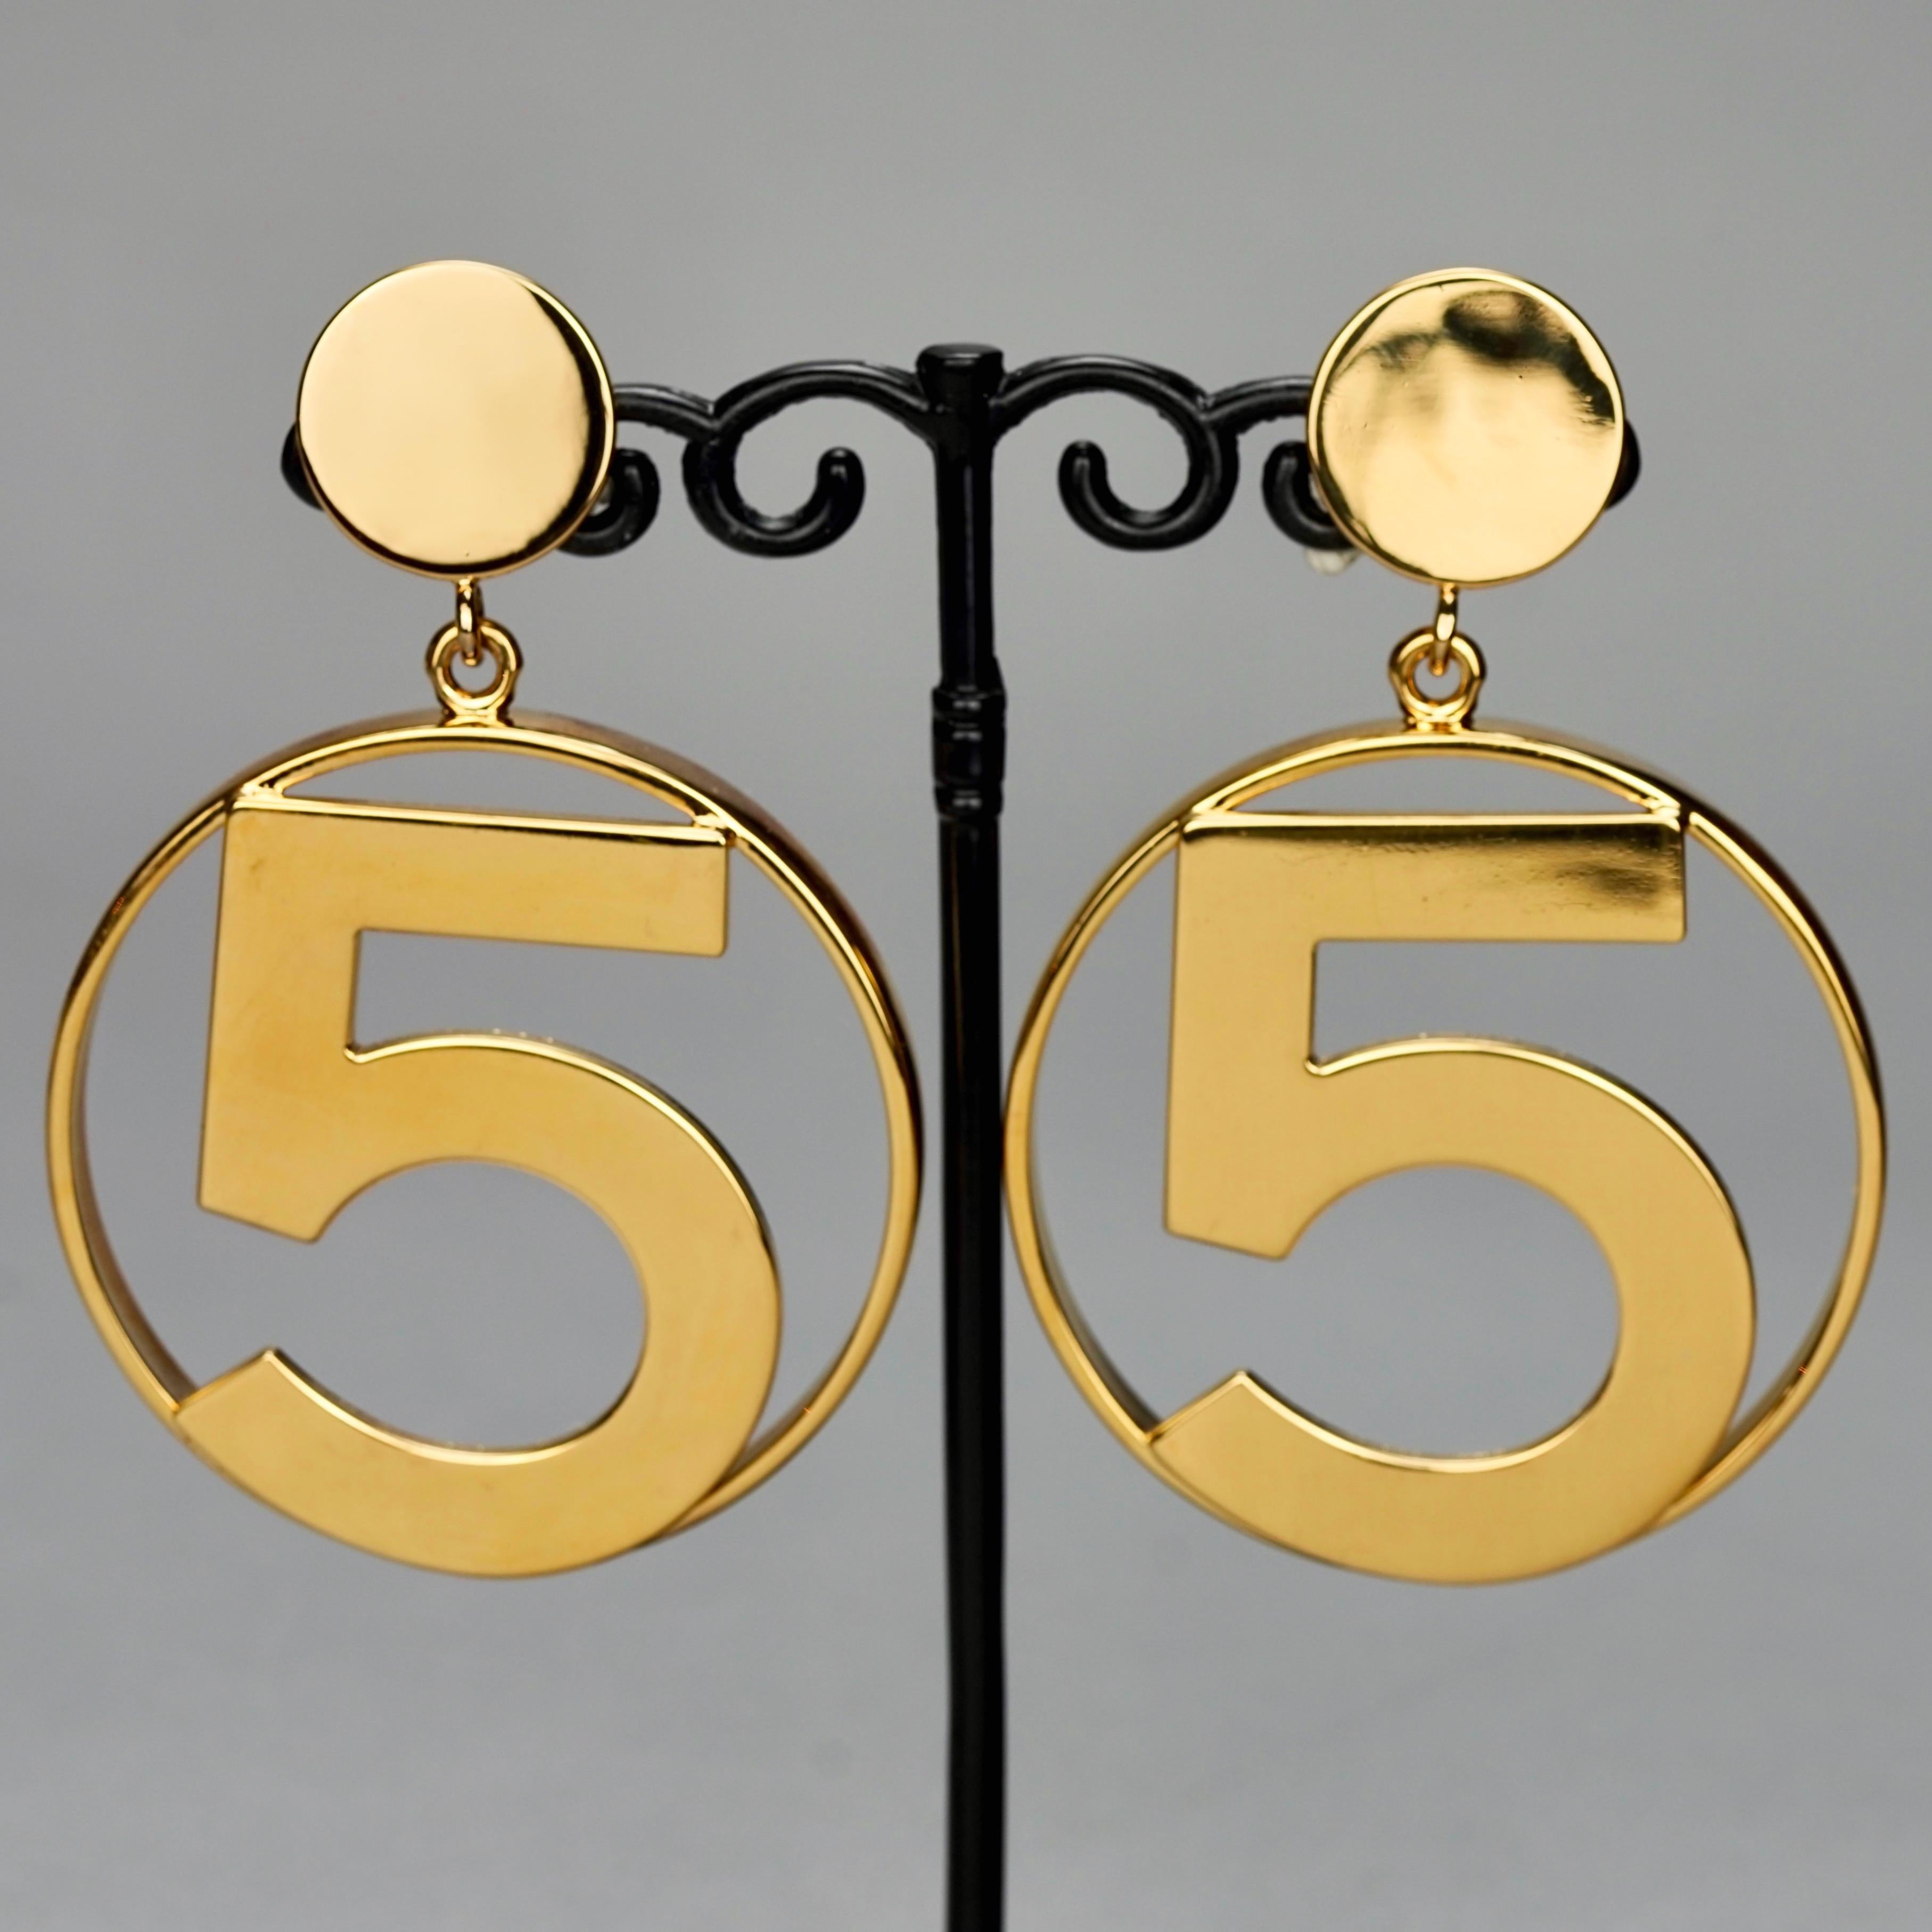 Vintage Jumbo CHANEL Iconic No 5 Hoop Earrings In Excellent Condition For Sale In Kingersheim, Alsace